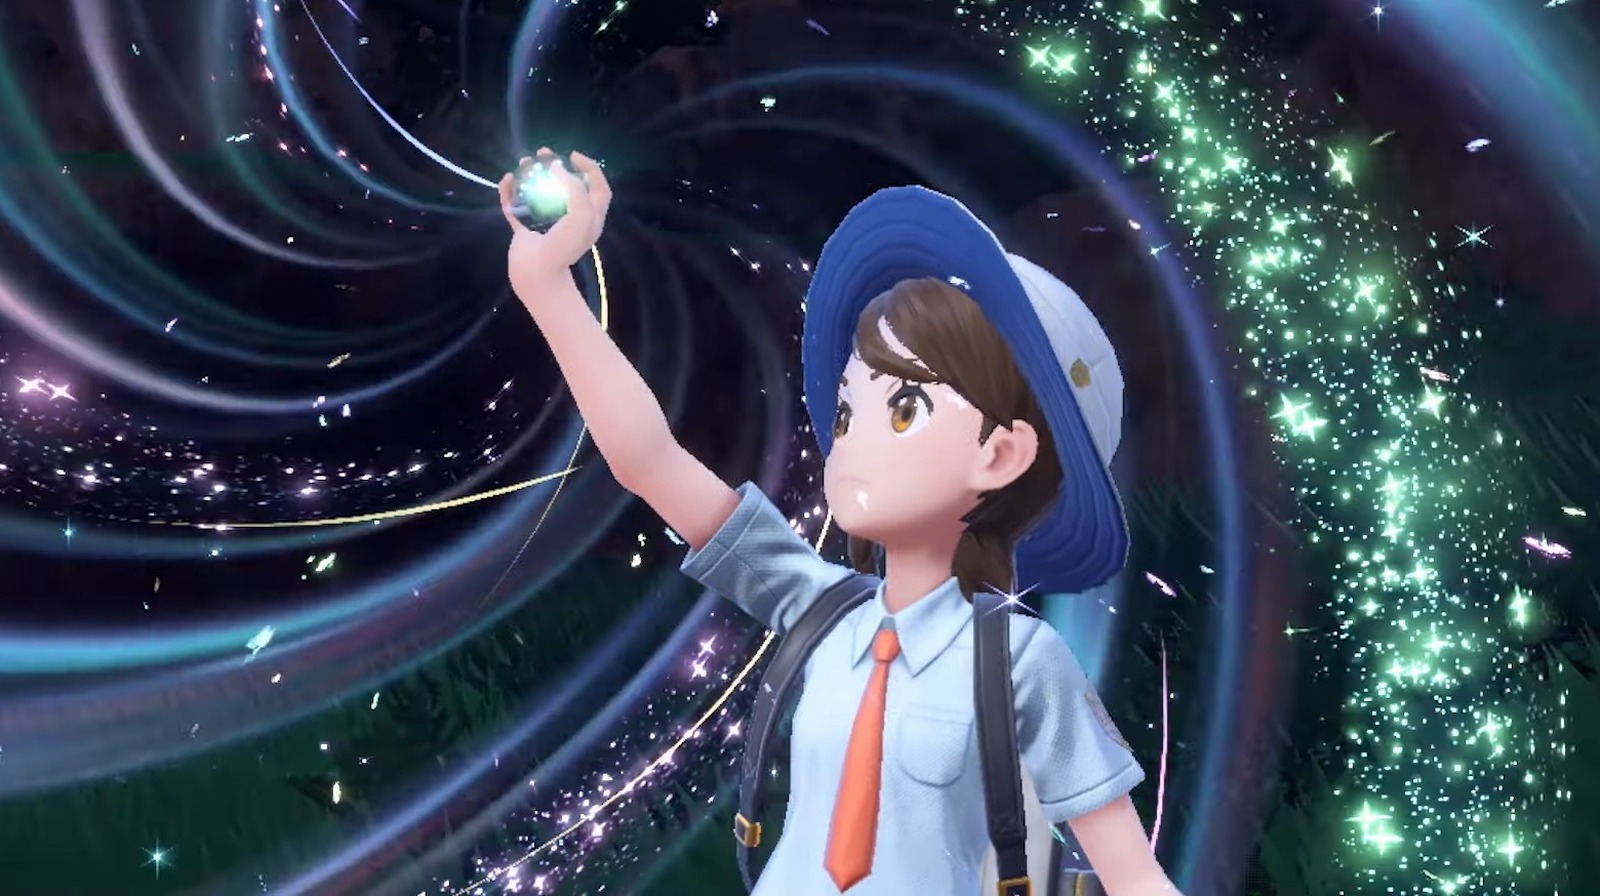 Pokémon Scarlet And Violet Overview Trailer Preps Us For This Week’s Big Launch – SlashGear